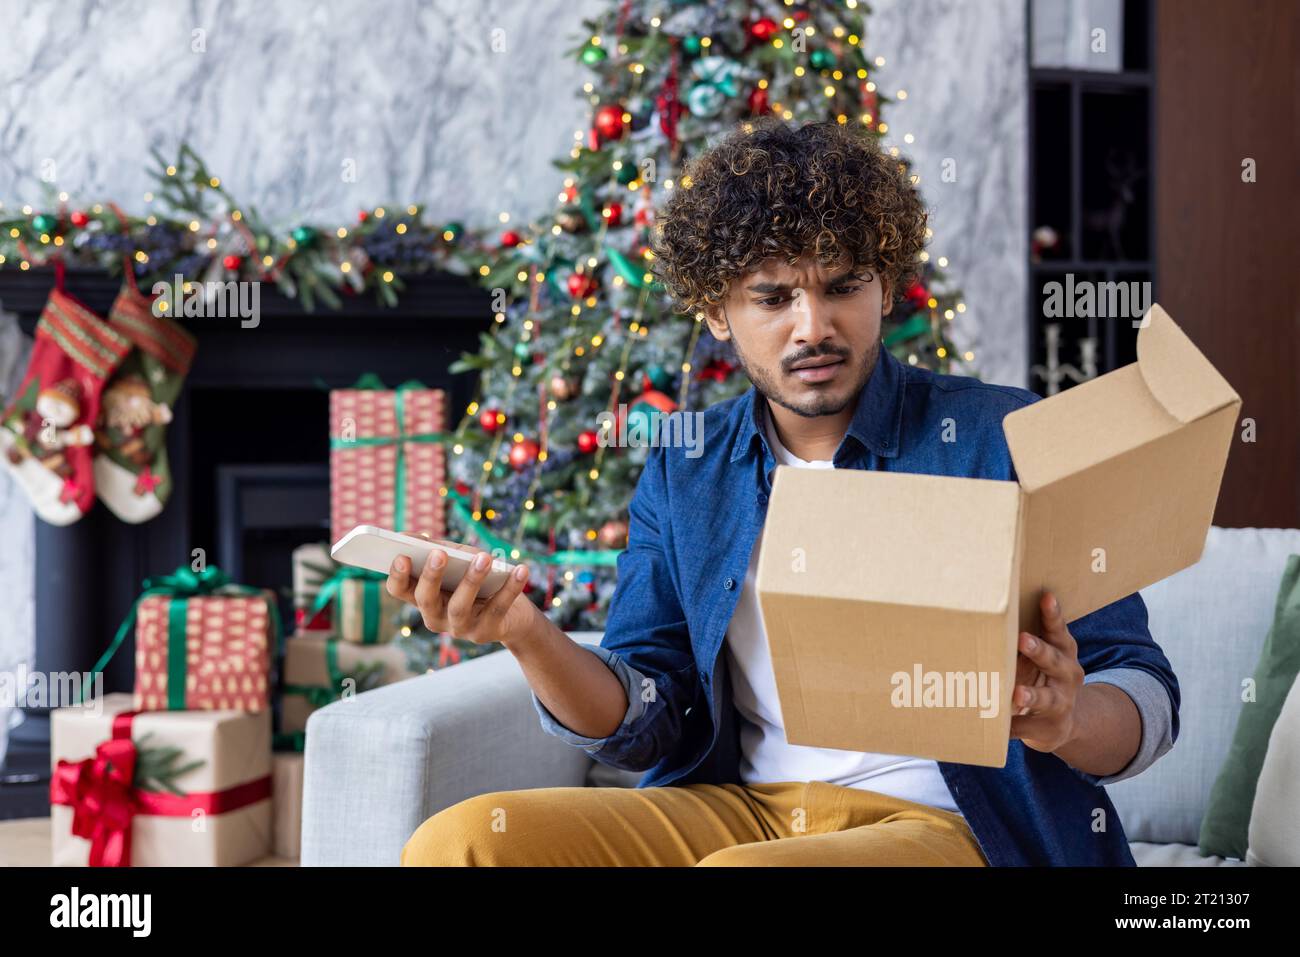 Man upset and disappointed received wrong spoiled package gift, Hispanic man for Christmas sitting in the living room, near the Christmas tree, holding the phone and calling customer service. Stock Photo